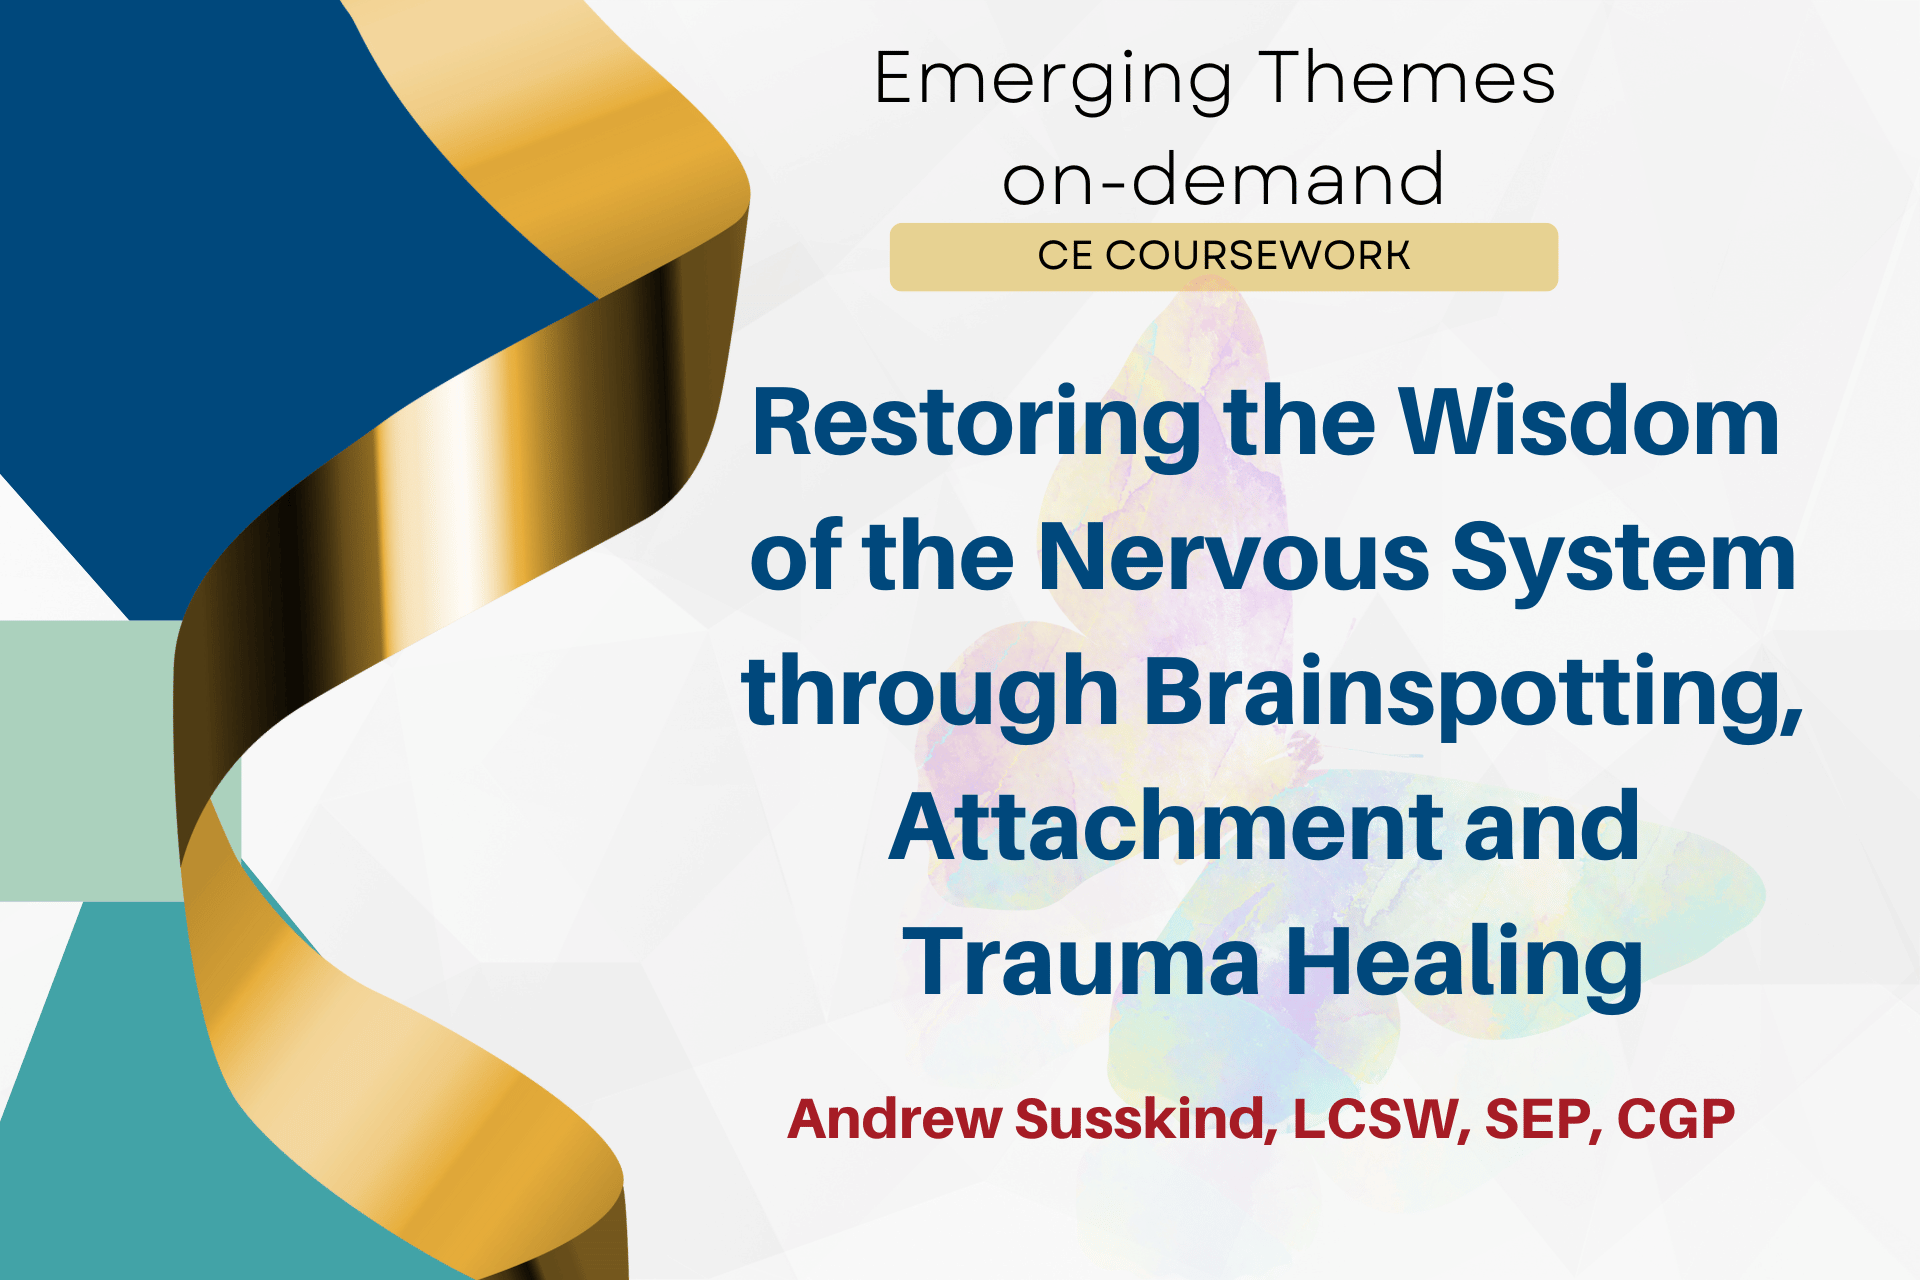 Restoring the Wisdom of the Nervous System through Brainspotting, Attachment and Trauma Healing